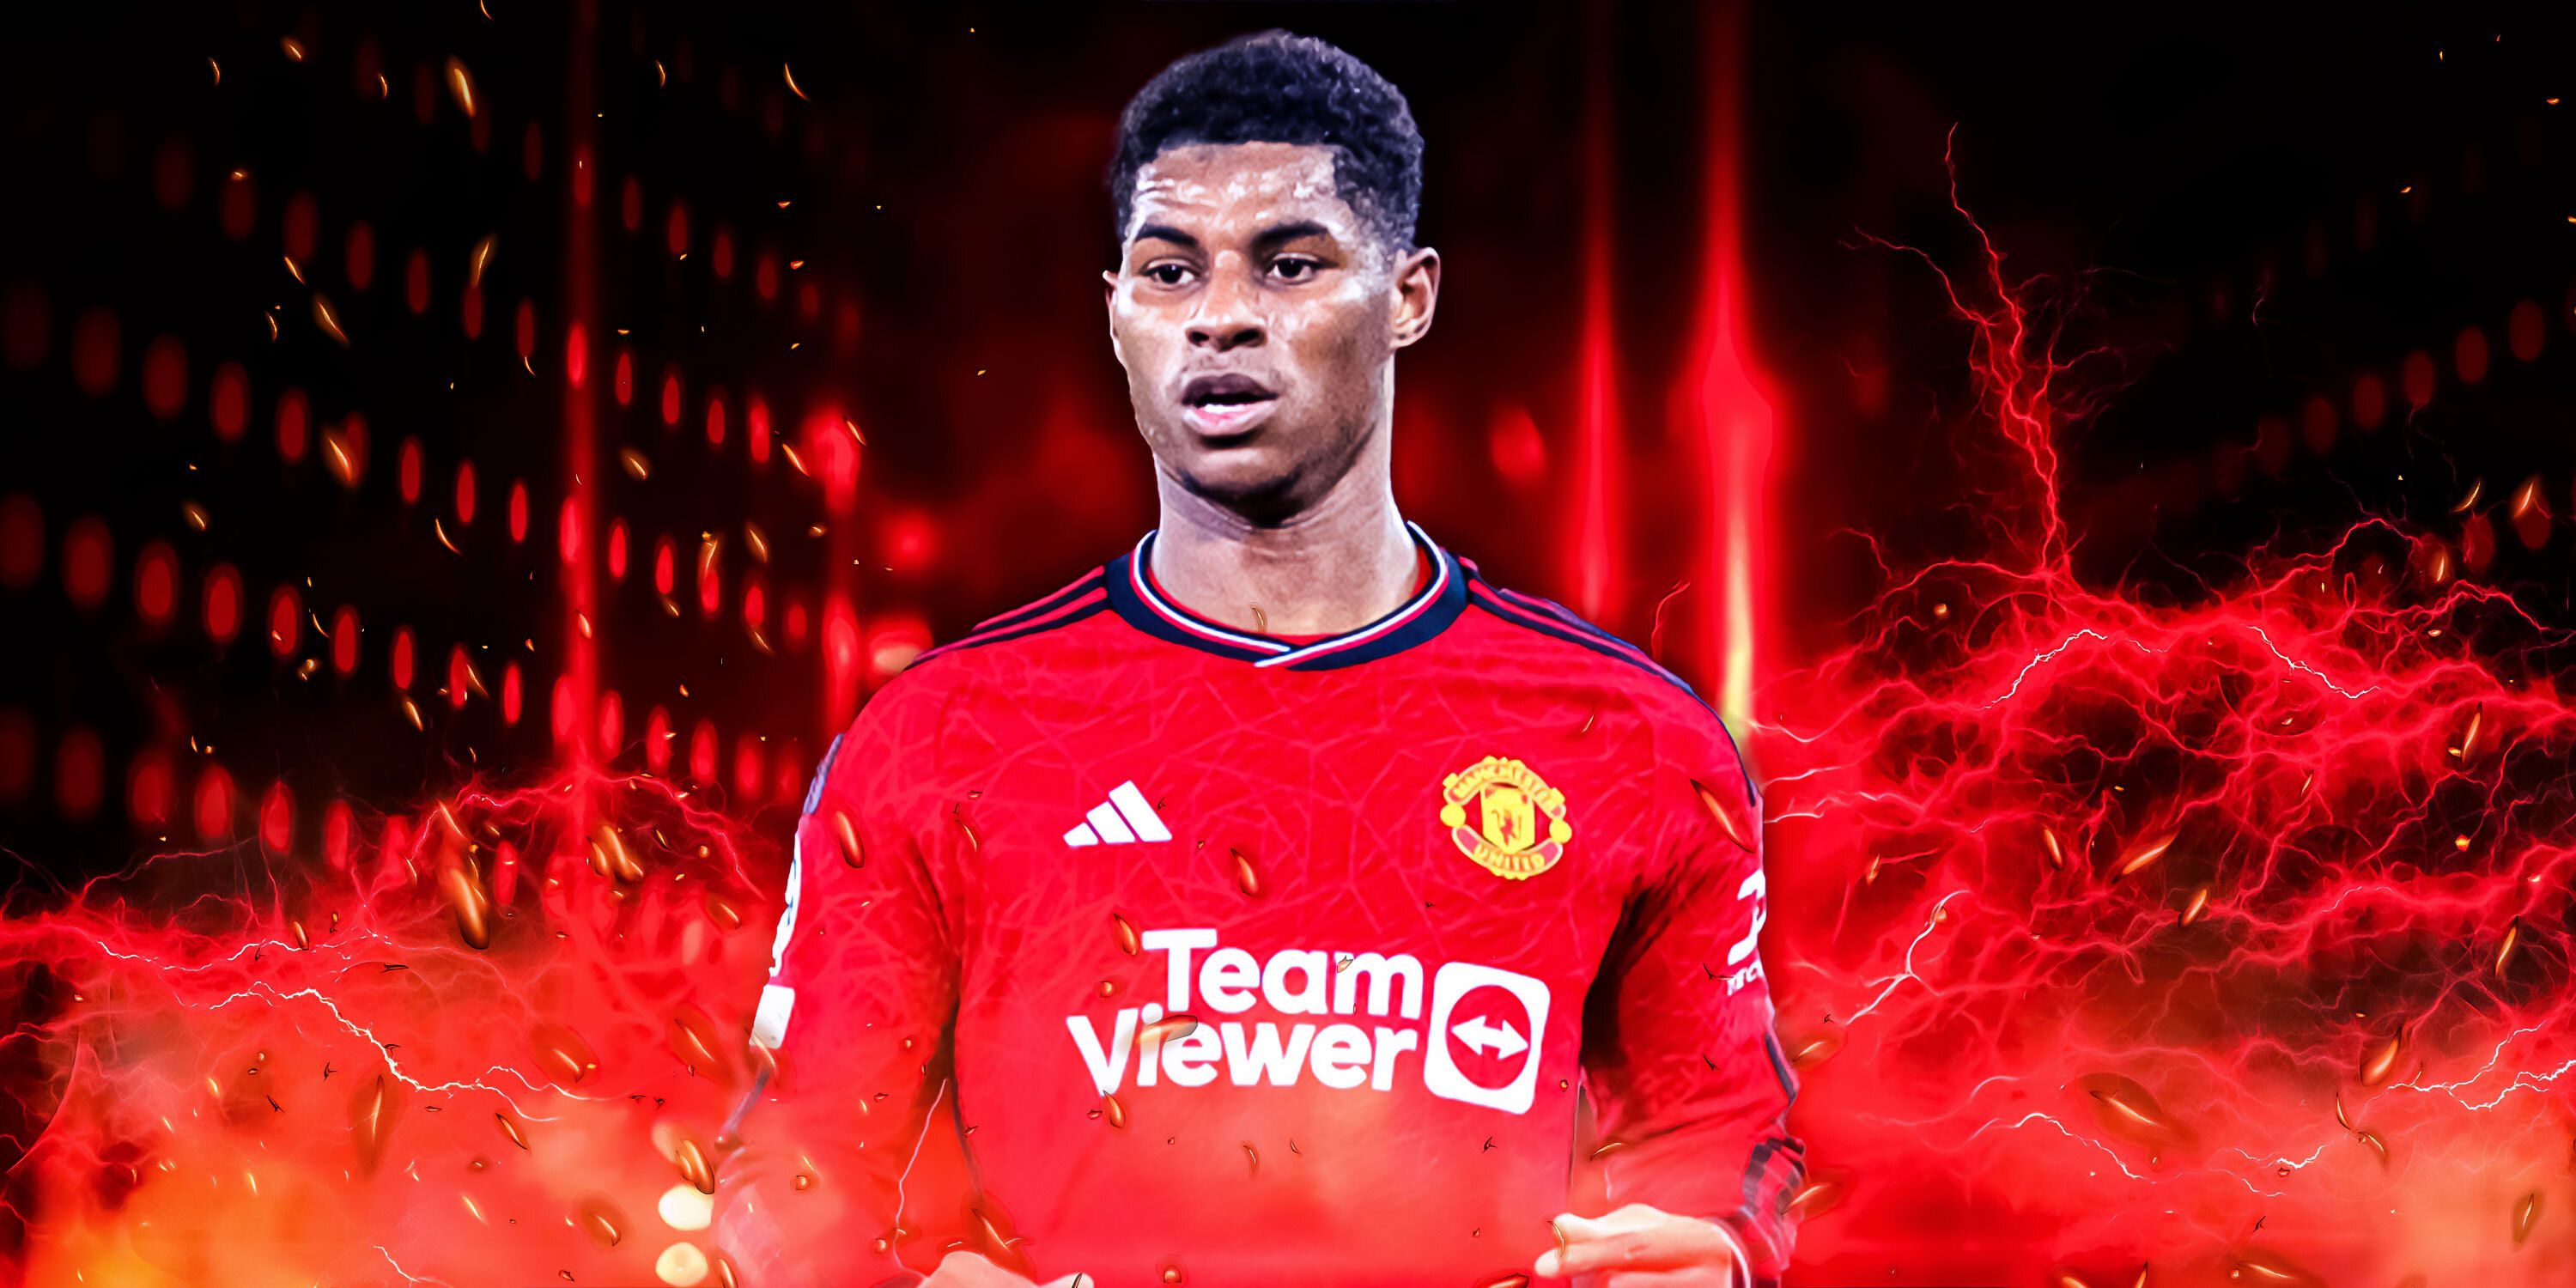 Marcus Rashford's Tweet Shows It's Time He Left Manchester United